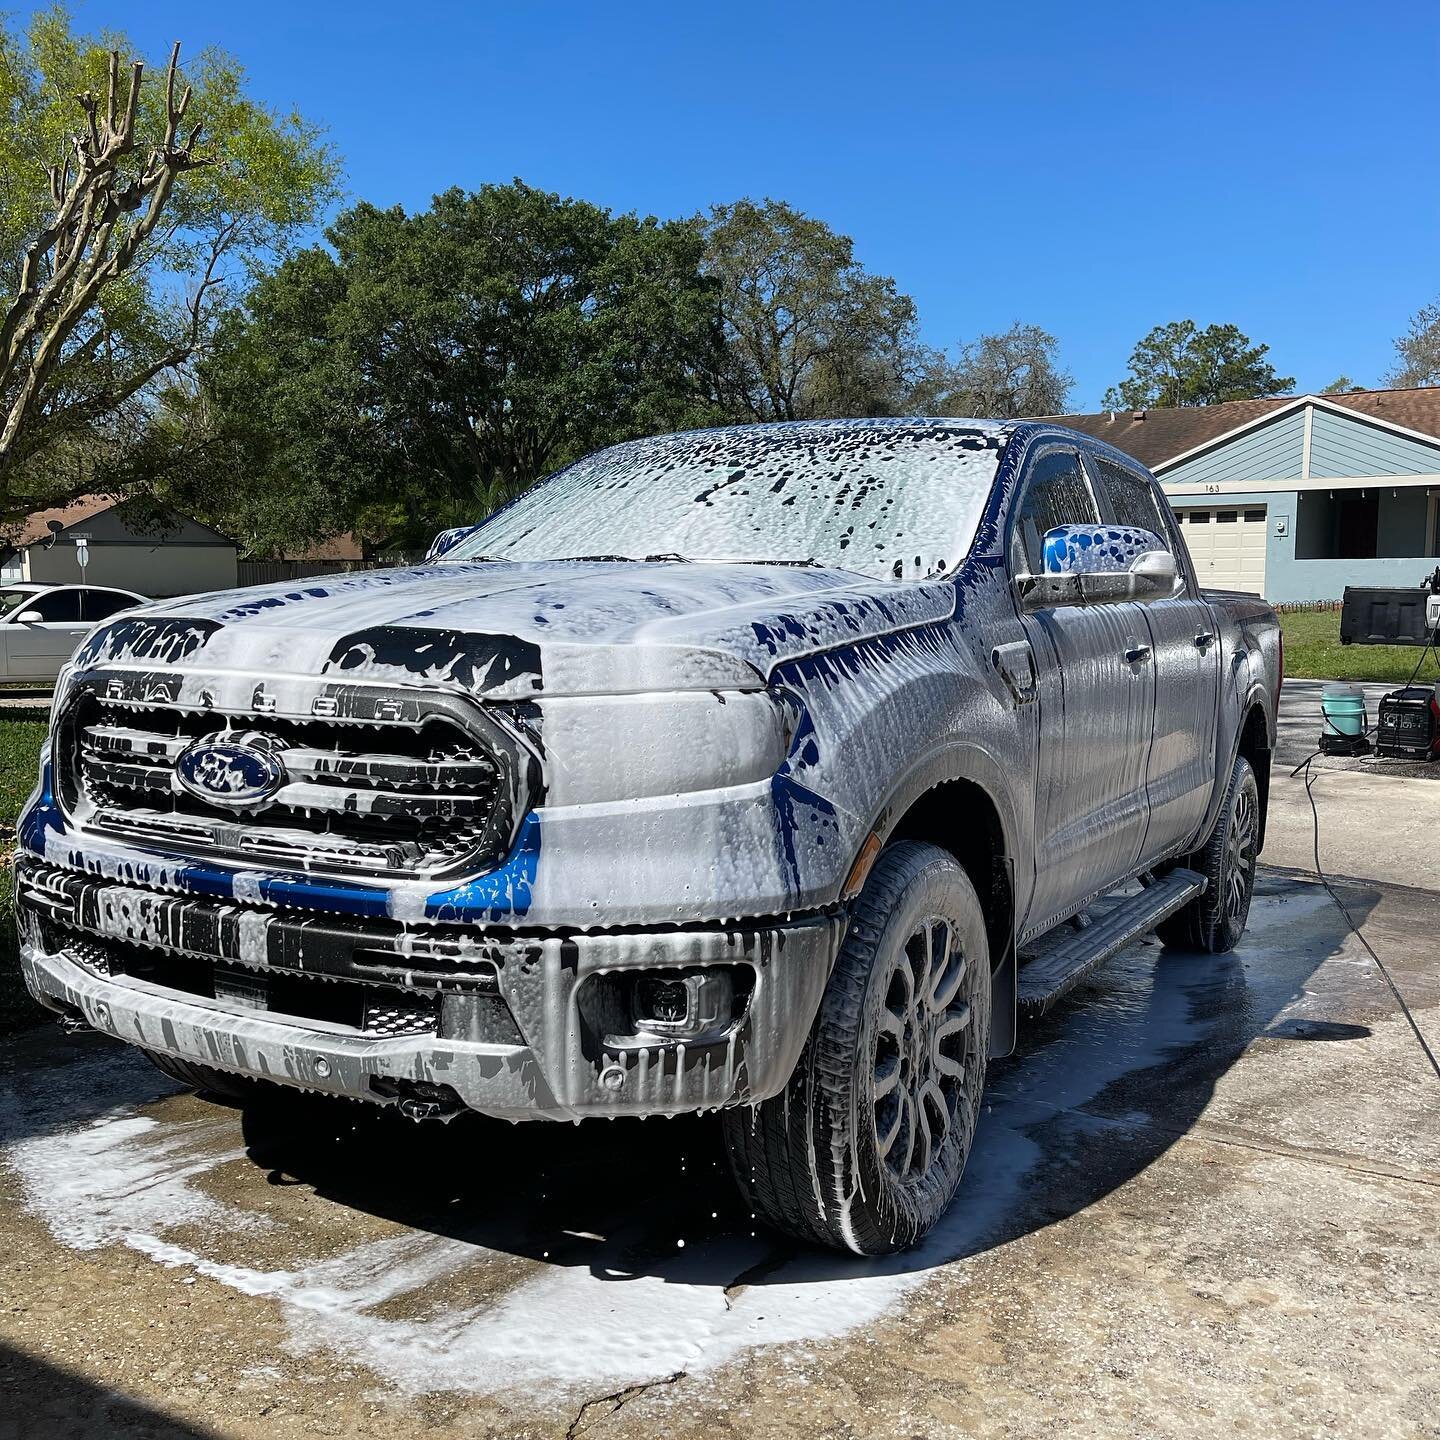 Happy Monday guys! Here we have this beautiful Ford Ranger we worked on a couple of weeks ago. We did a complete exterior detail and as you can see the tires were completely caked on, quick exterior clay bar and then a sealant for upcoming months of 